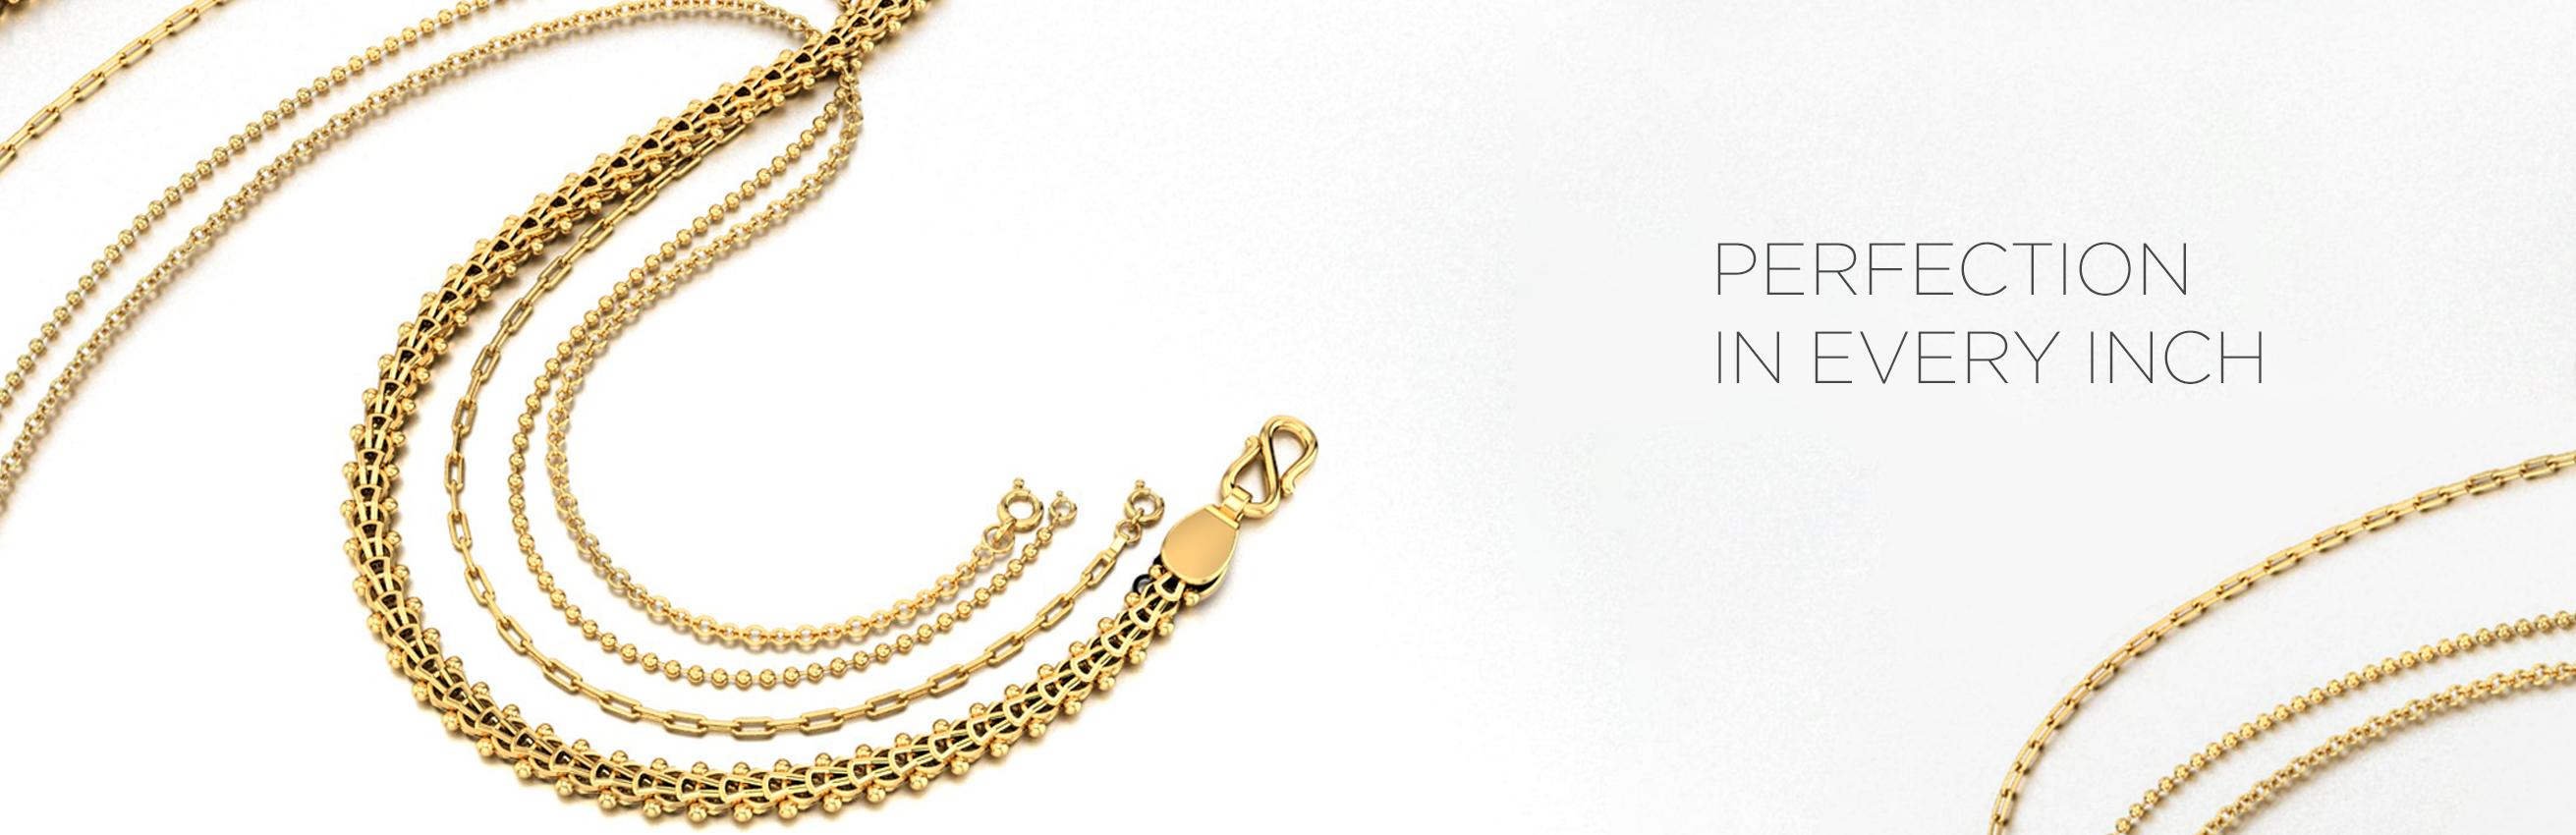 Gold chain design and gold chain models